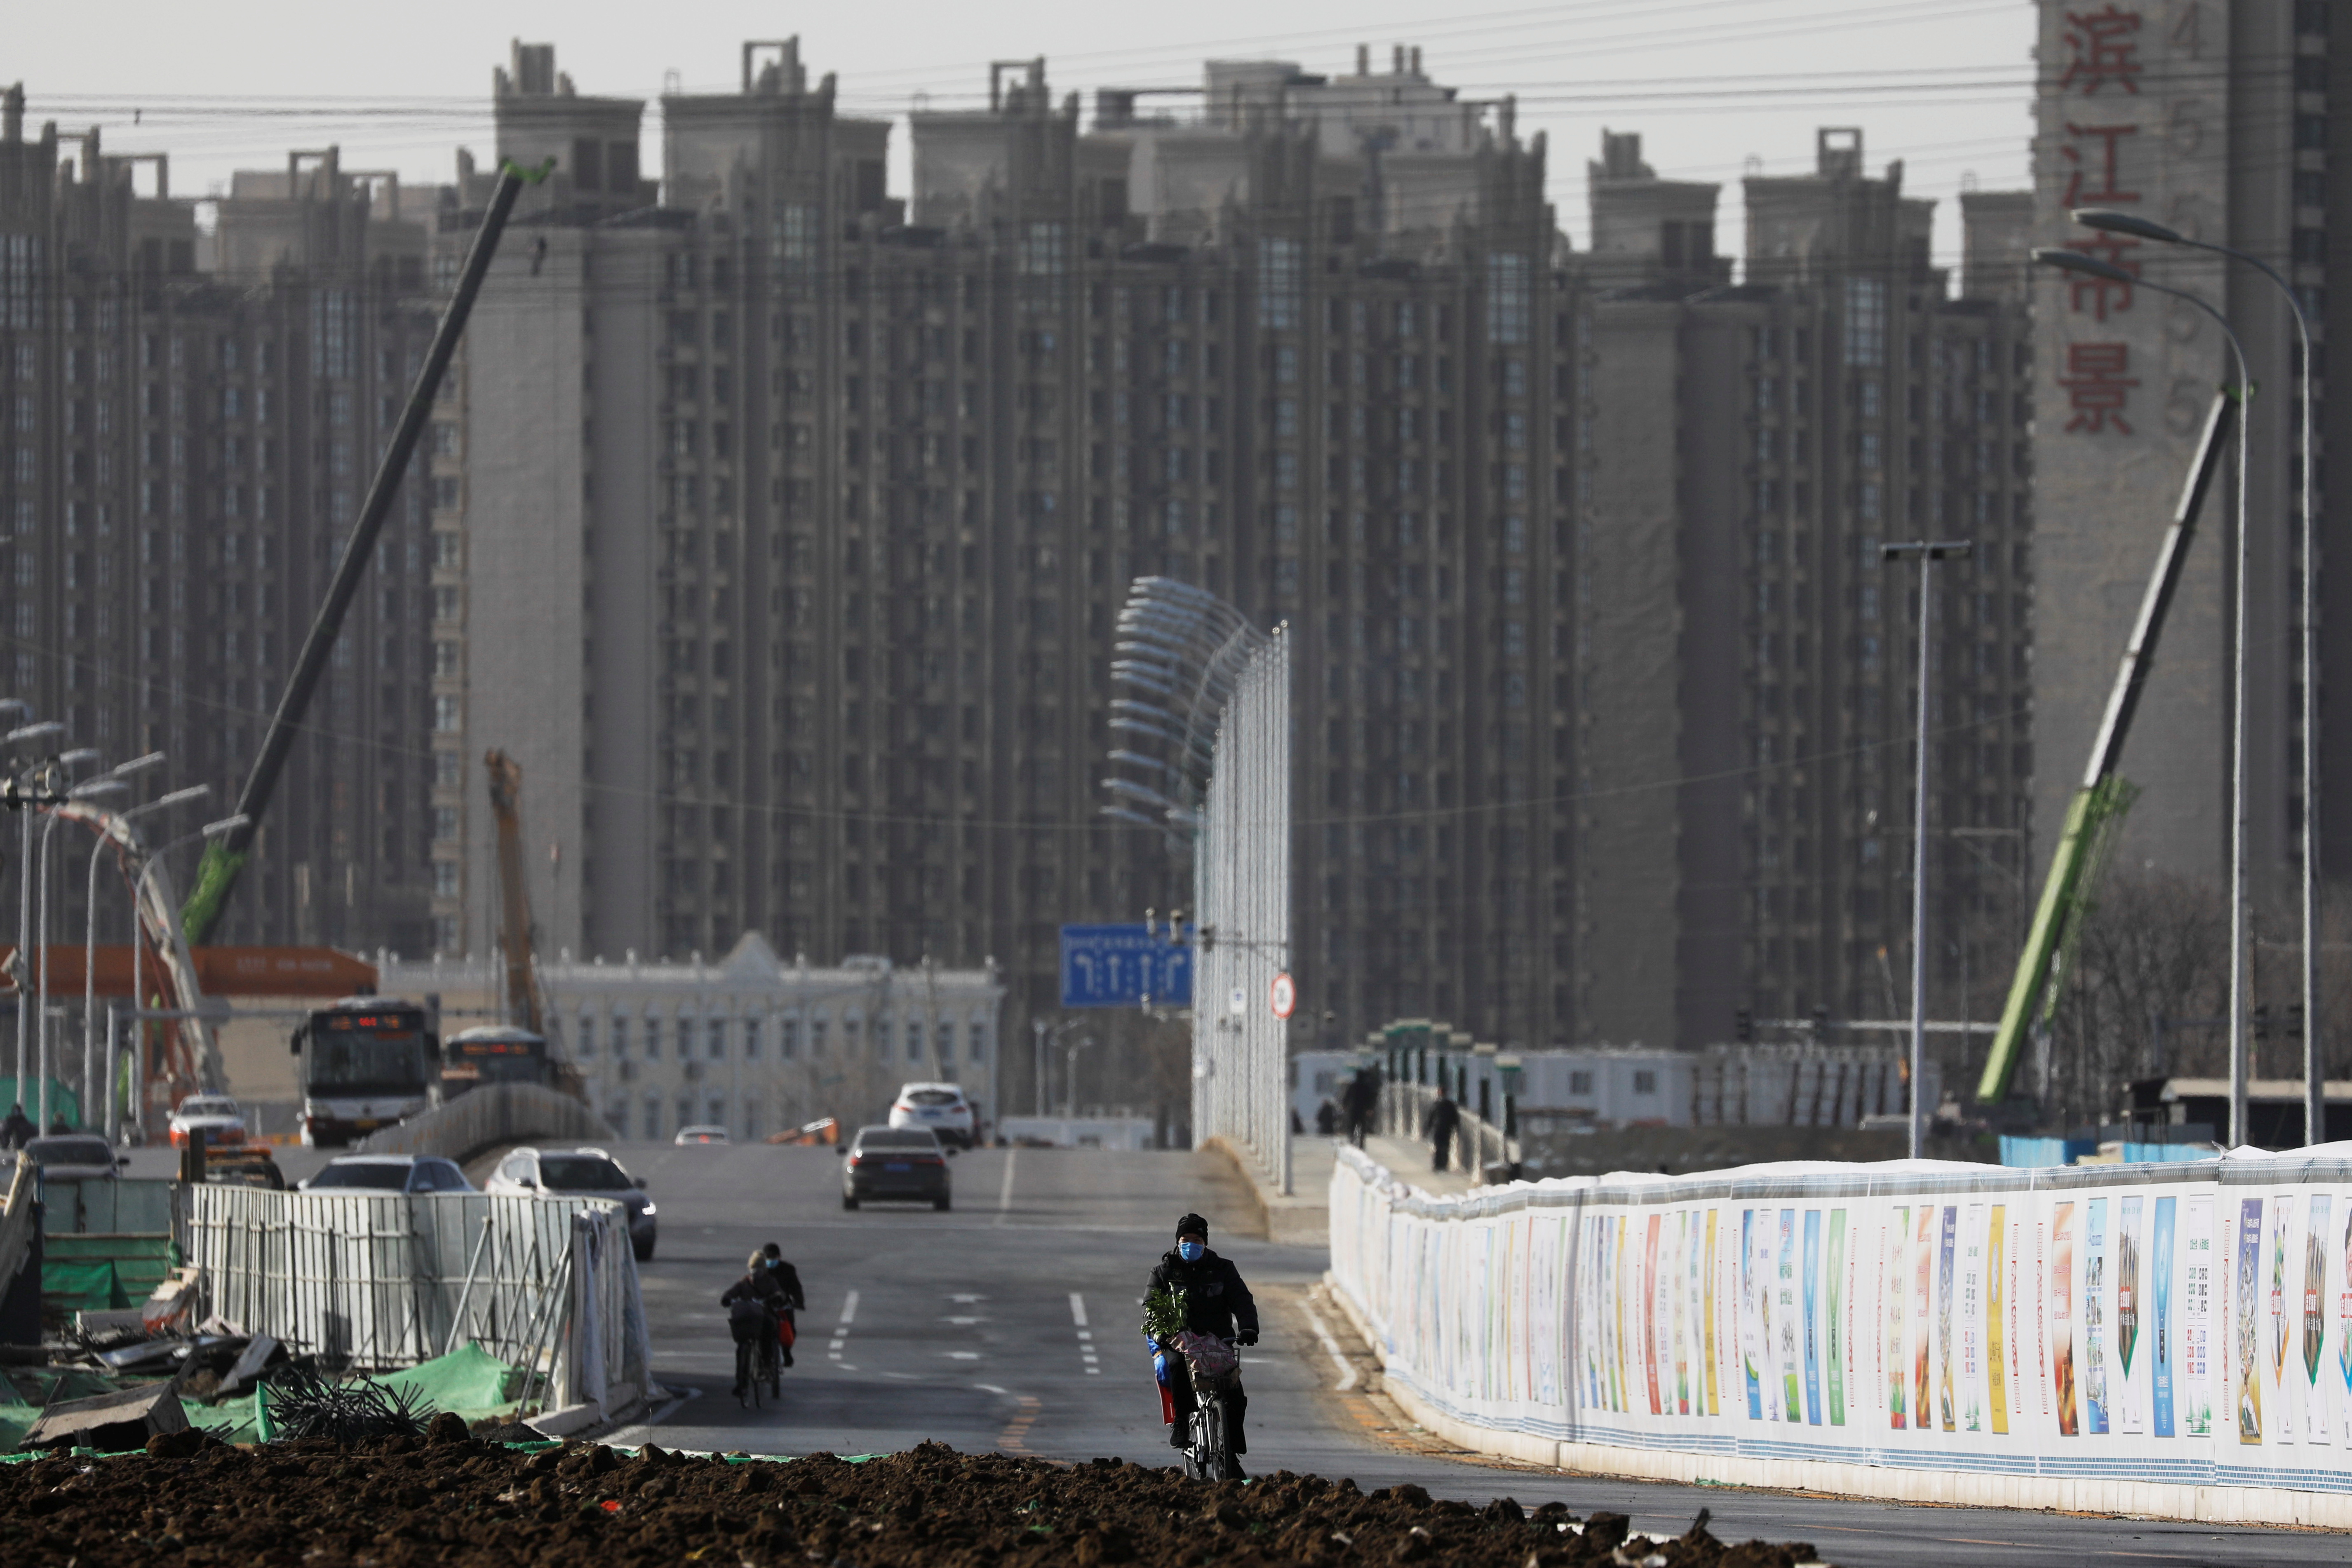 Man rides a bicycle next to a construction site near residential buildings in Beijing